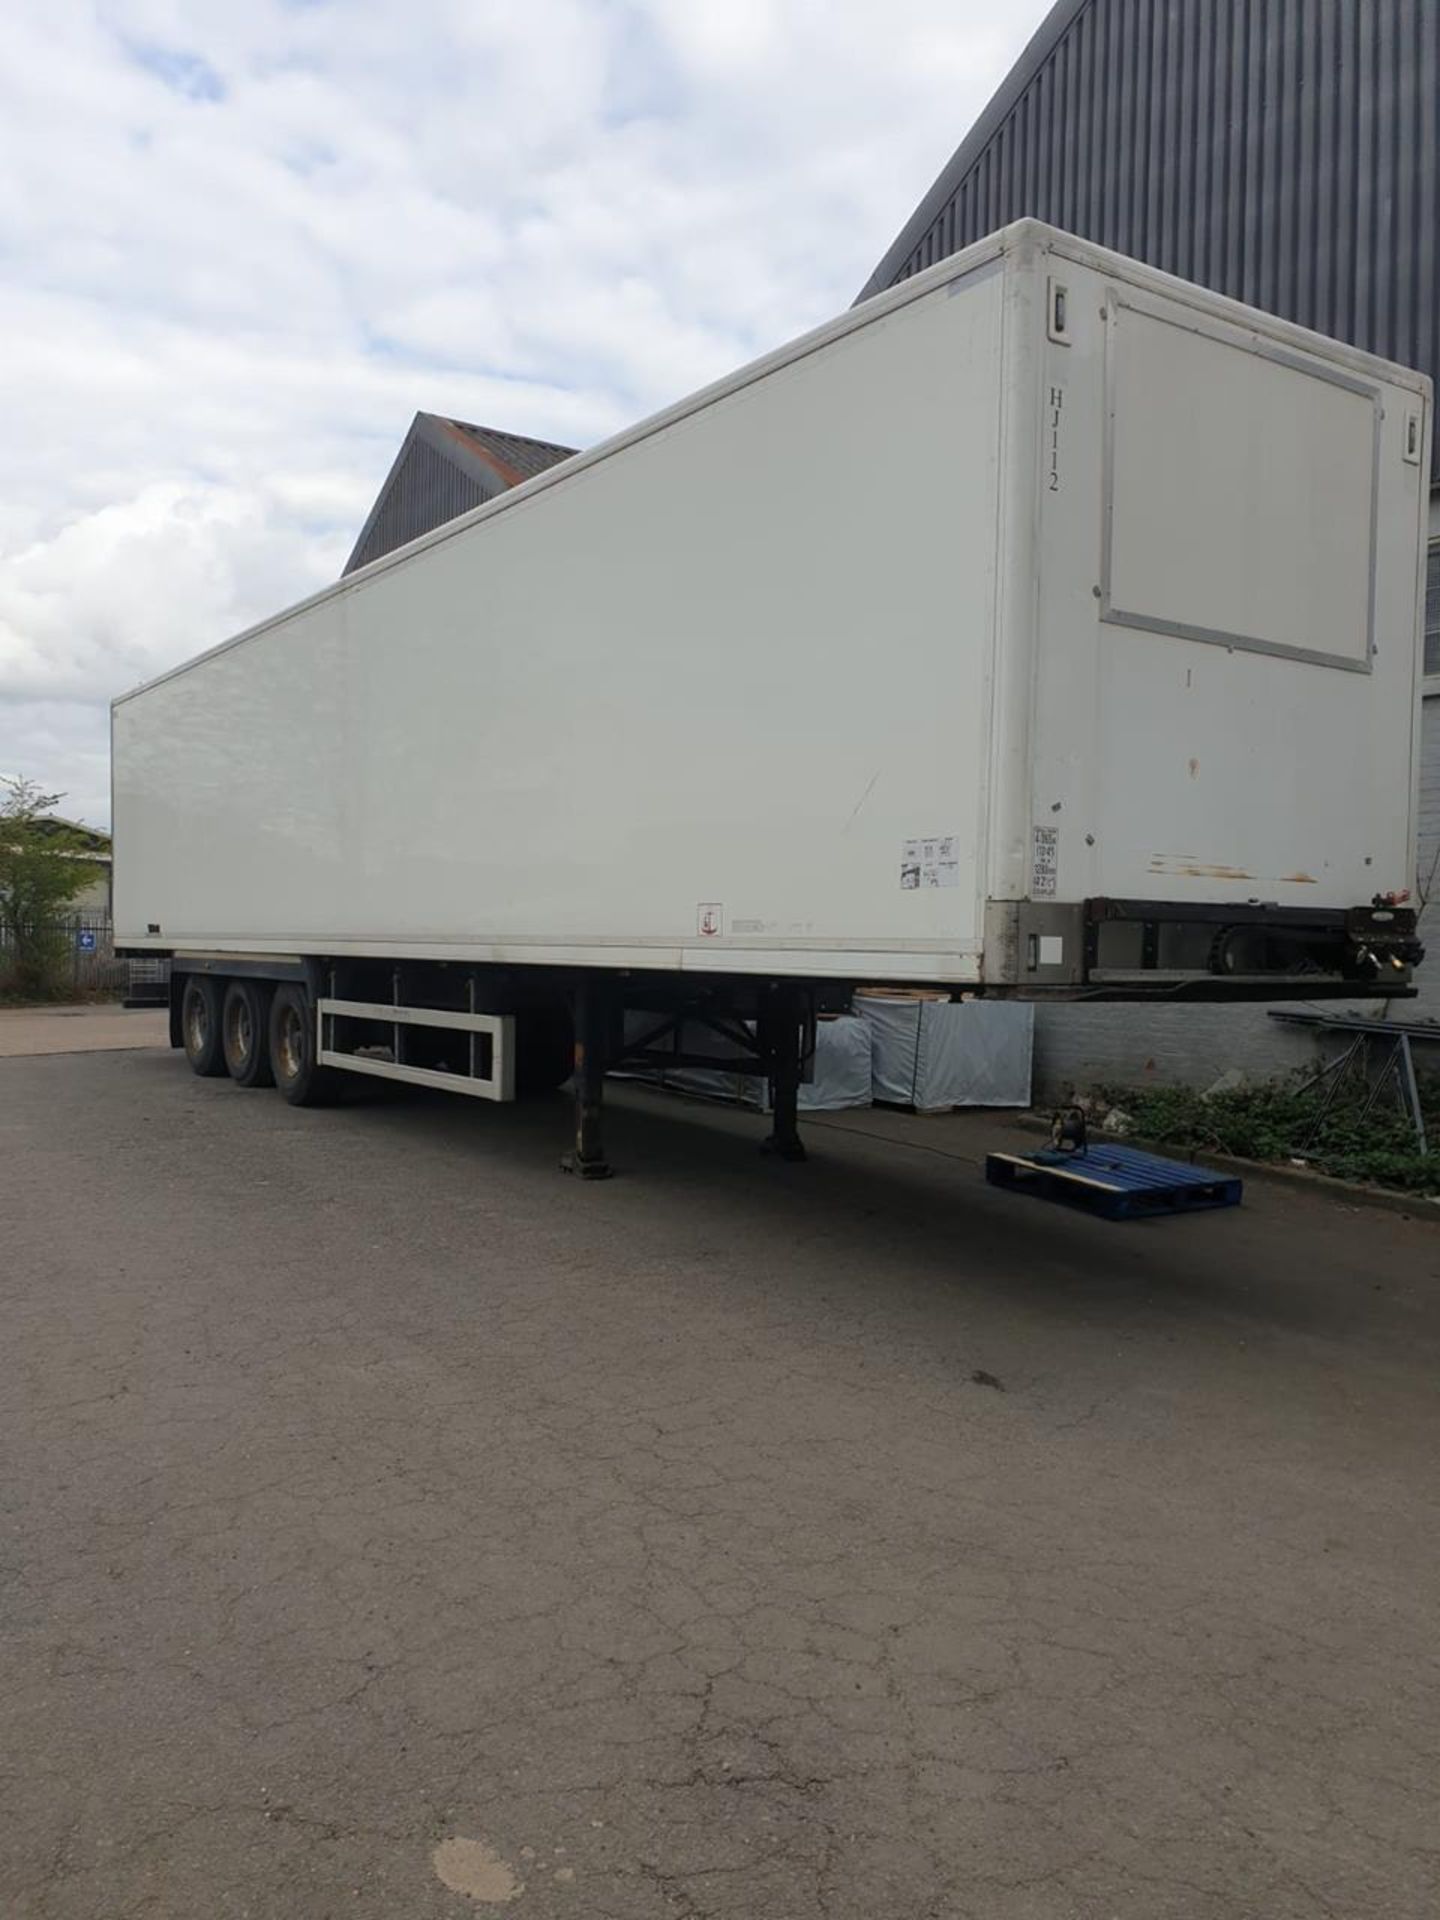 + VAT 2013 Montracon 13.6m Tri-Axle Insulated Box Trailer - Roller Shutter At Rear - 4.065m Overall